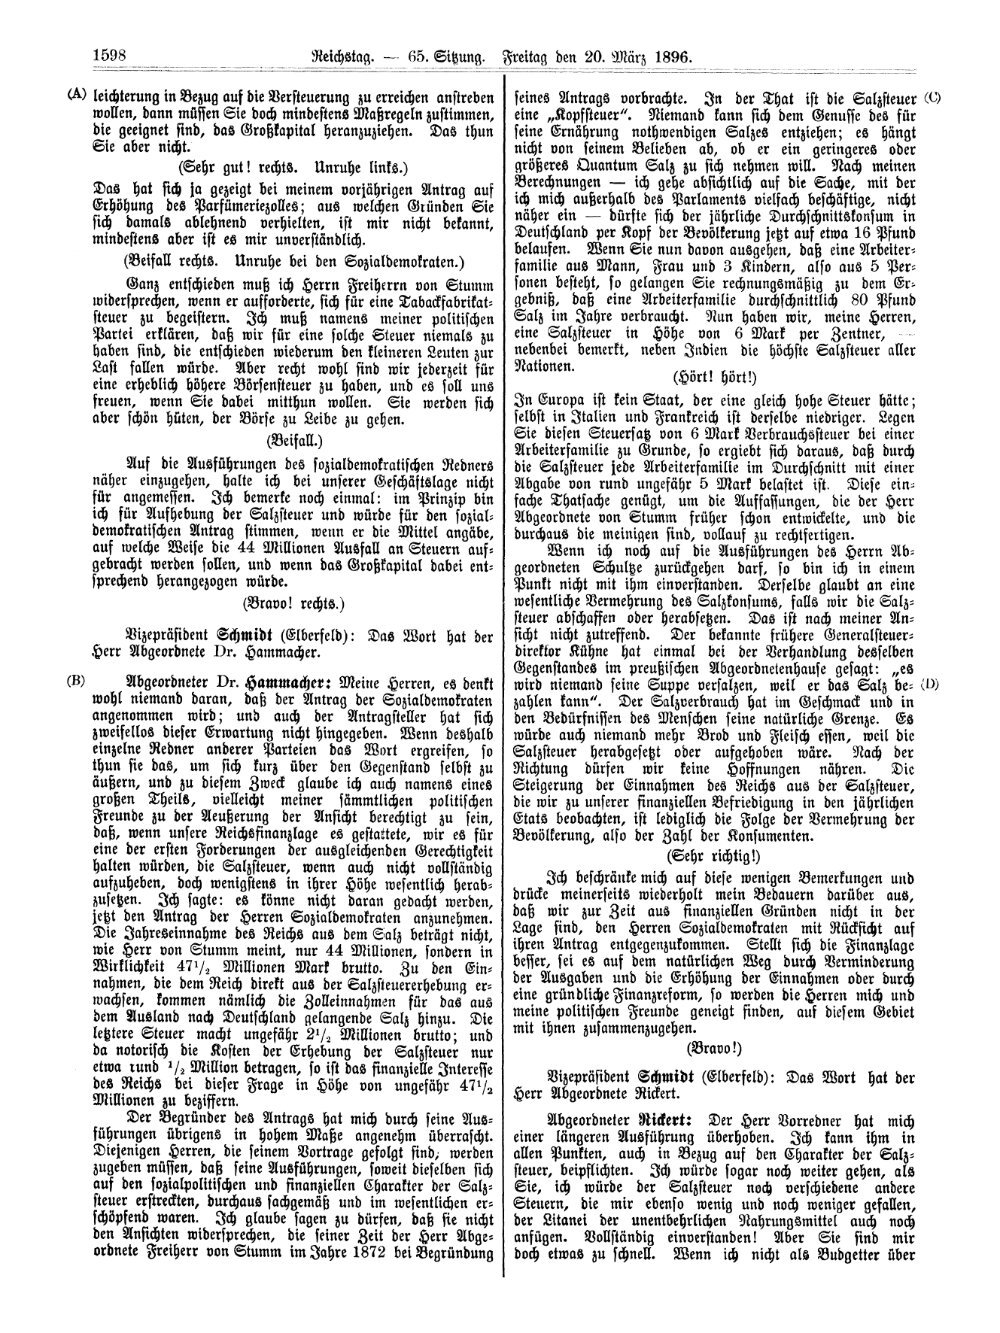 Scan of page 1598